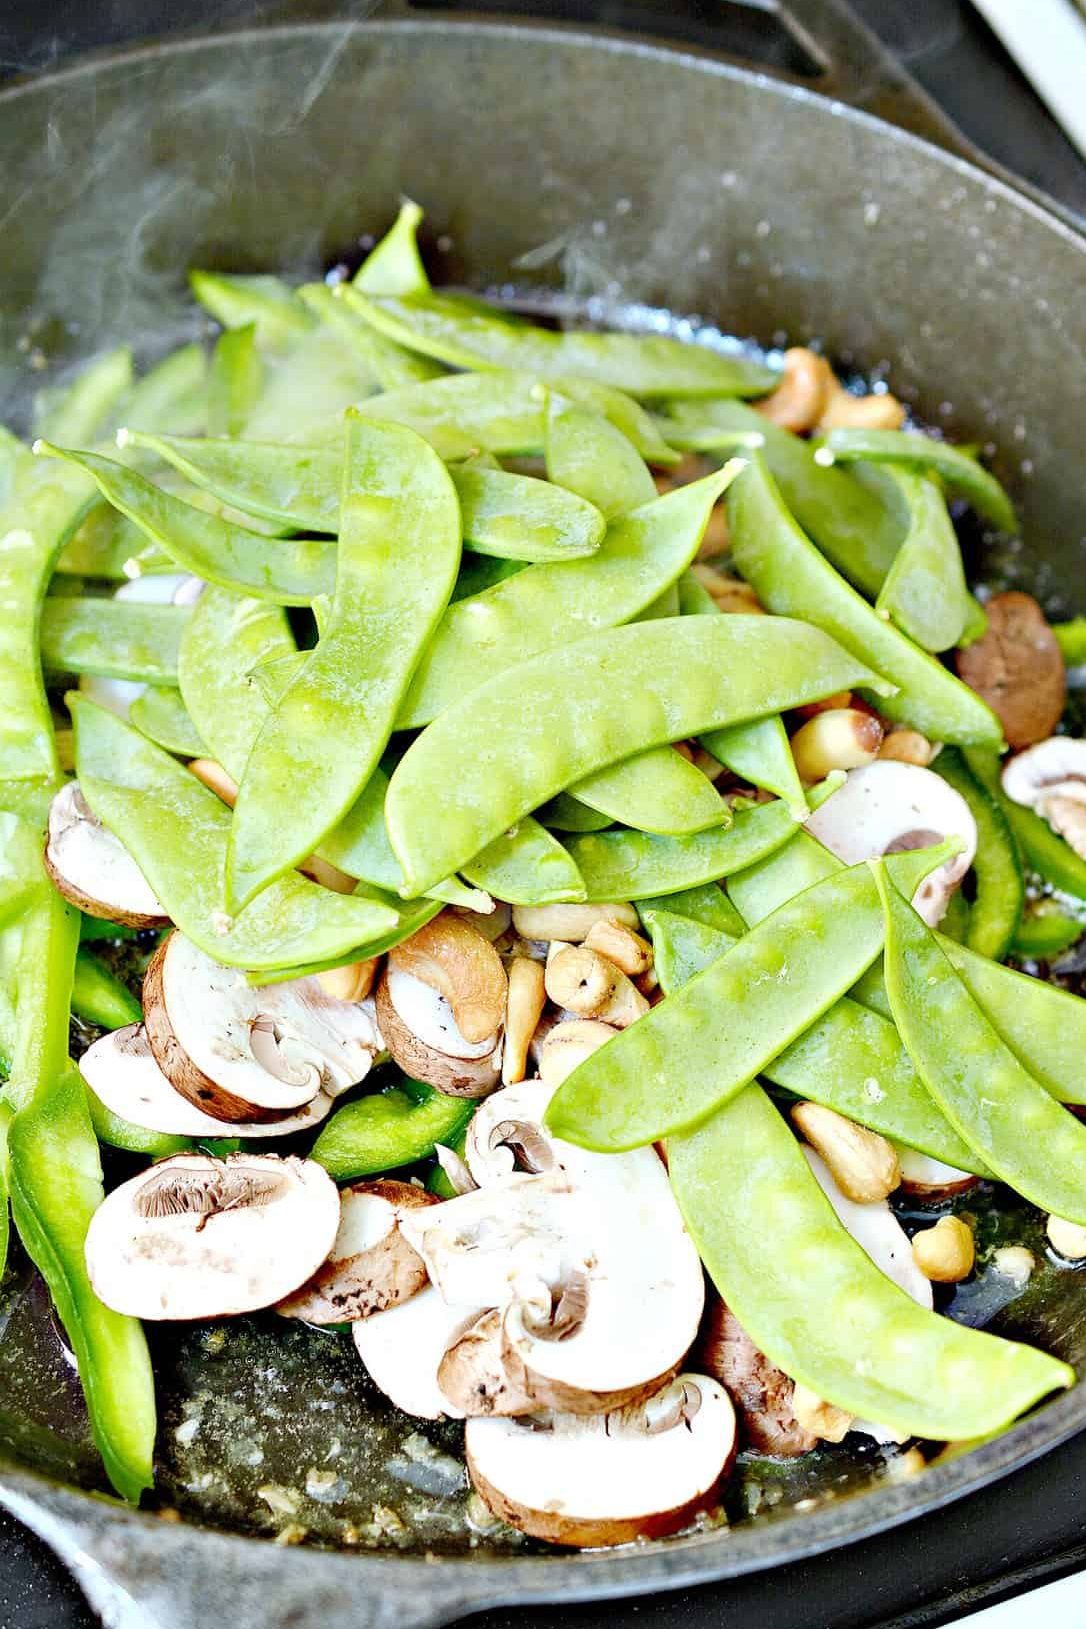 add 1 ½ cup of snow peas.